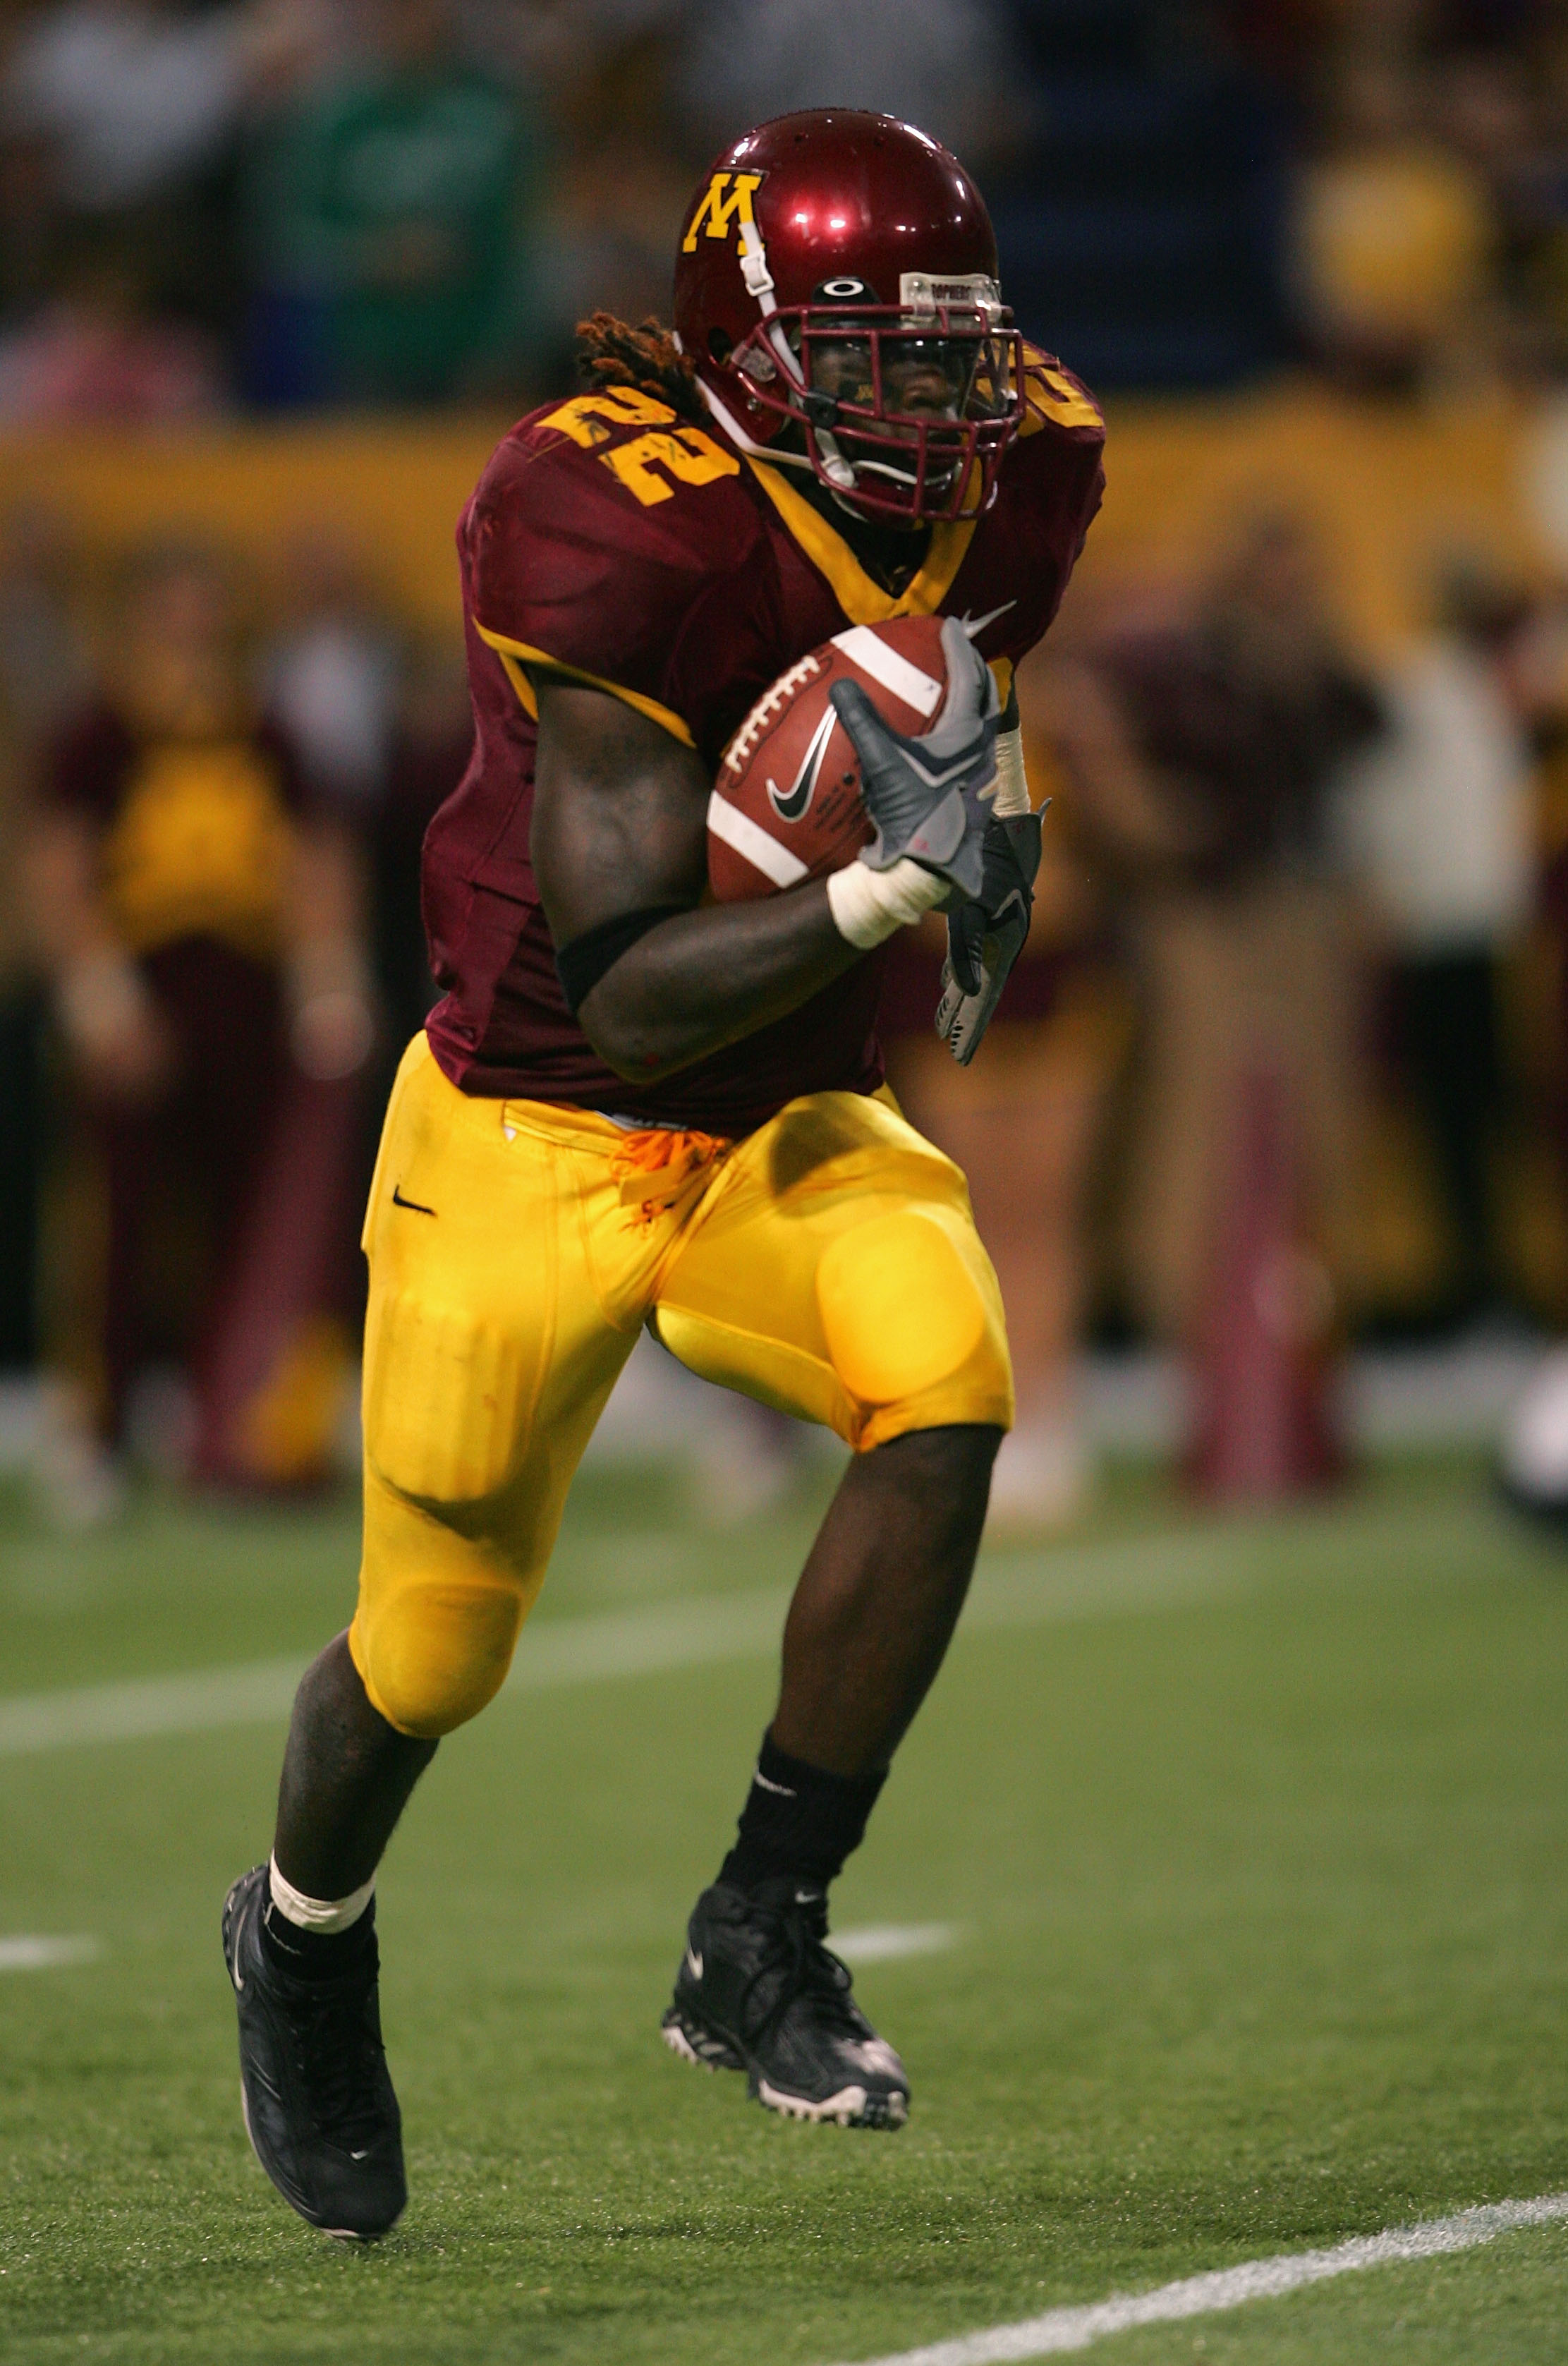 MINNEAPOLIS, MN - SEPTEMBER 24:  Laurence Maroney #22 of Minnesota carries the ball against Purdue on September 24 2005 at the Hubert H Humphrey Metrodome in Minneapolis, Minnesota. Minnesota defeated Purdue 42-35 in double overtime. (Photo by Matthew Sto